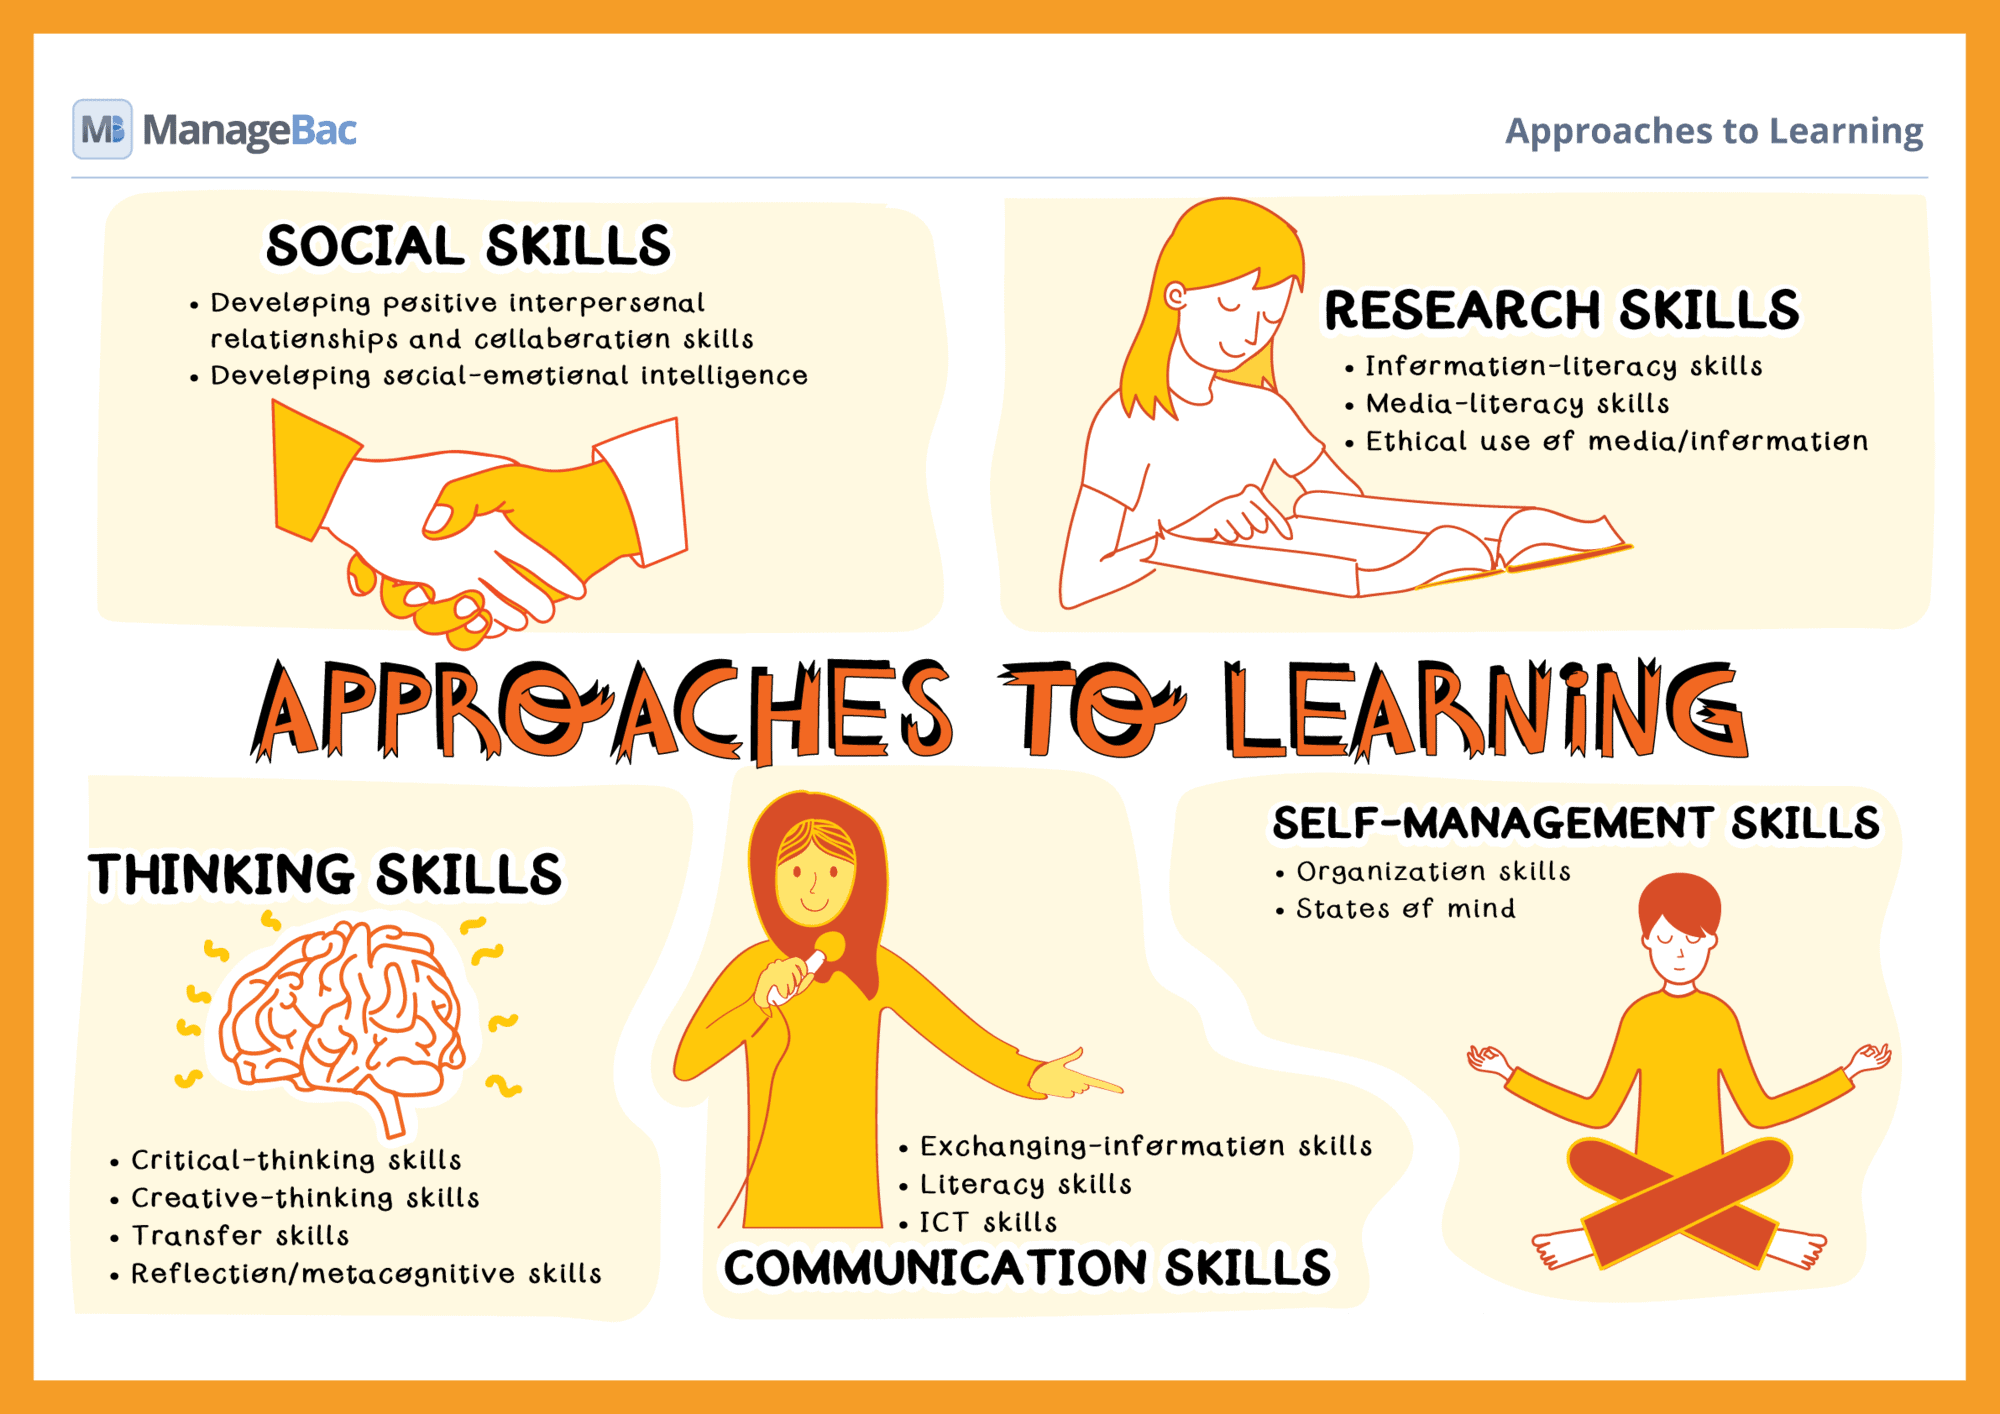 Approaches to Learning